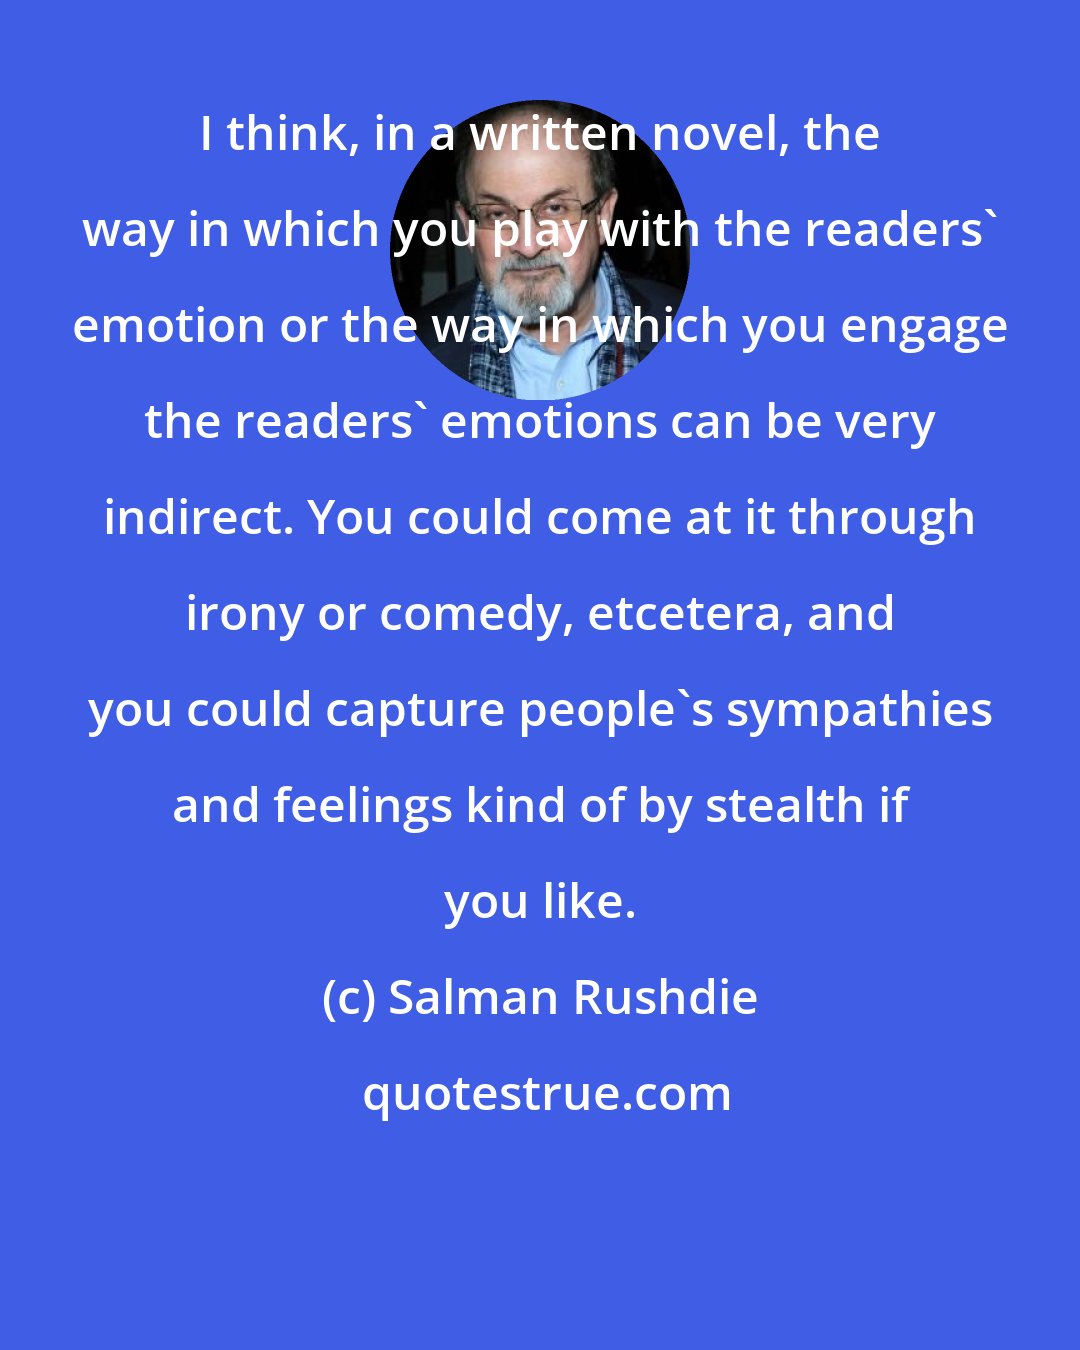 Salman Rushdie: I think, in a written novel, the way in which you play with the readers' emotion or the way in which you engage the readers' emotions can be very indirect. You could come at it through irony or comedy, etcetera, and you could capture people's sympathies and feelings kind of by stealth if you like.